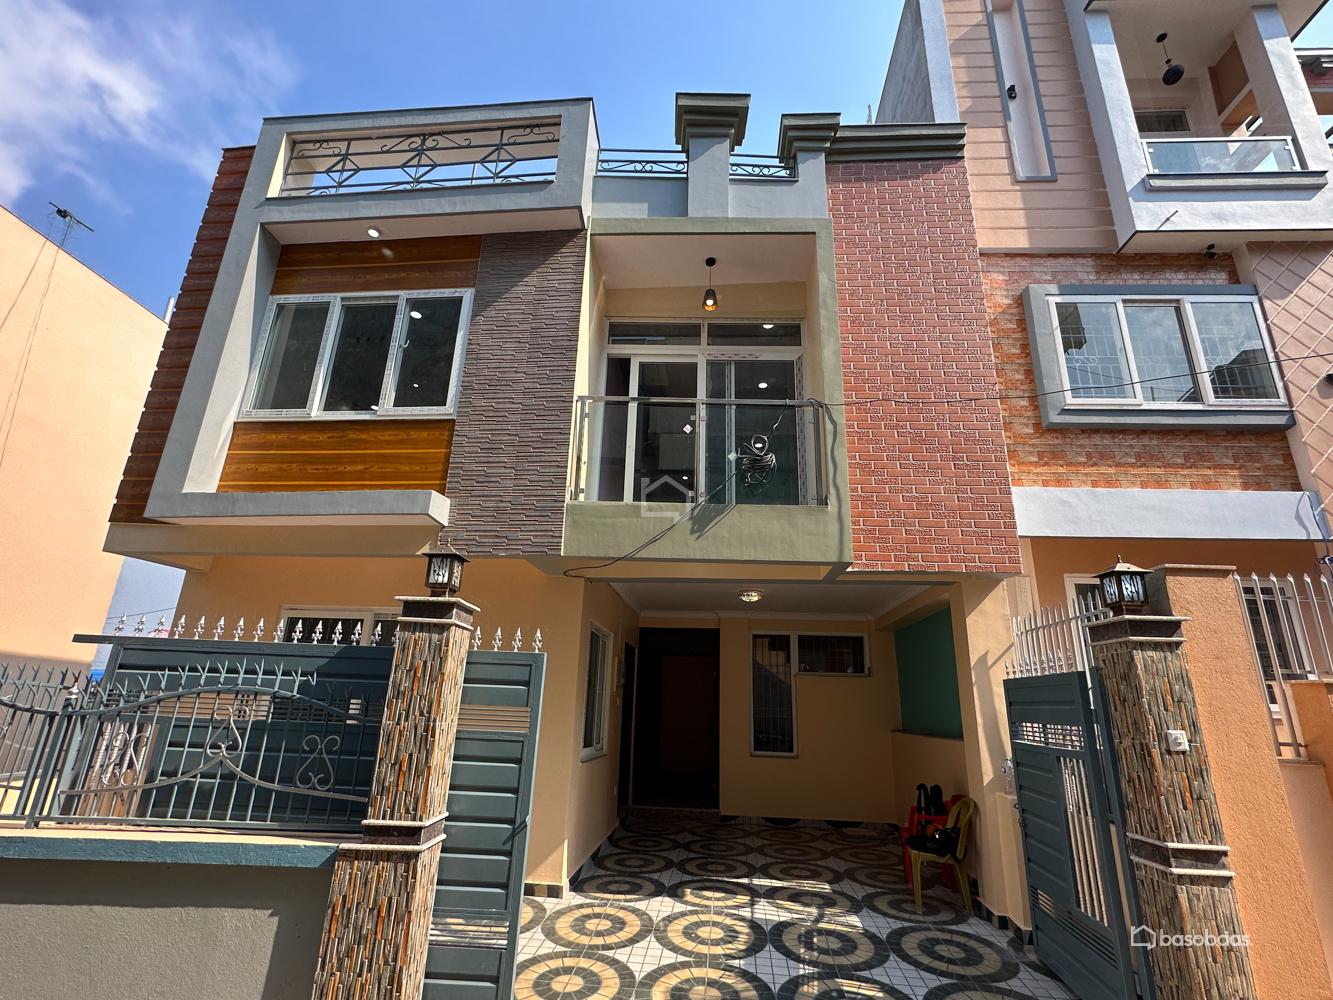 RESIDENTAL : House for Sale in Imadol, Lalitpur Image 1